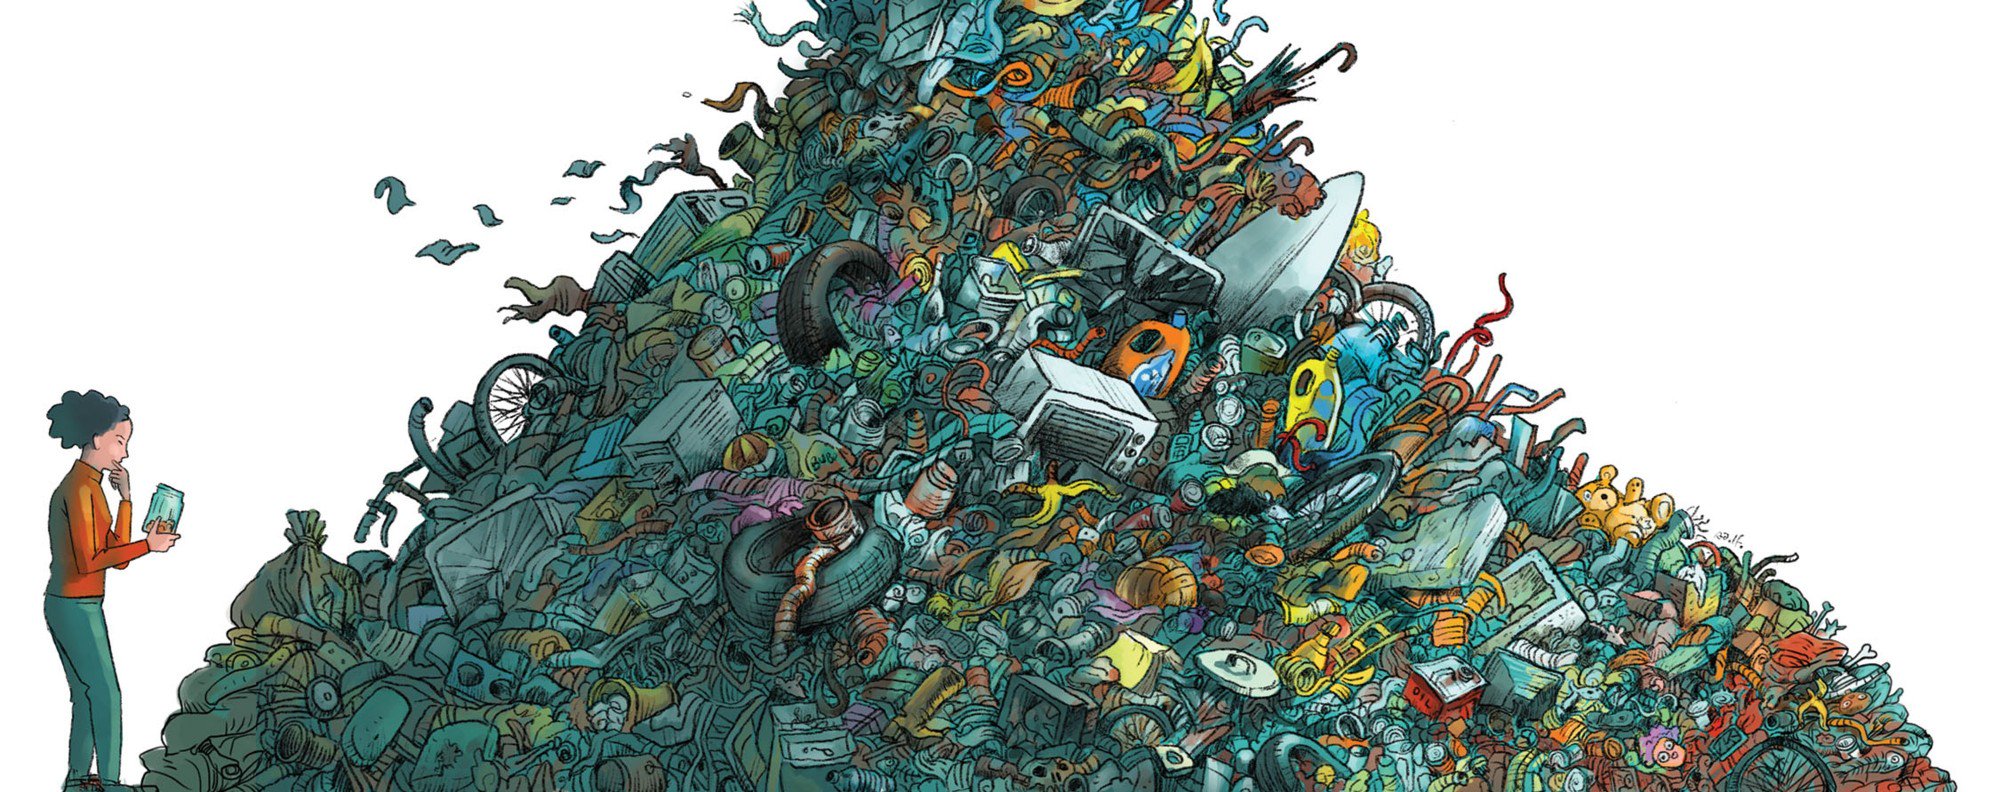 SCMP illustration for Six Hong Kong Zero Waste Champions article